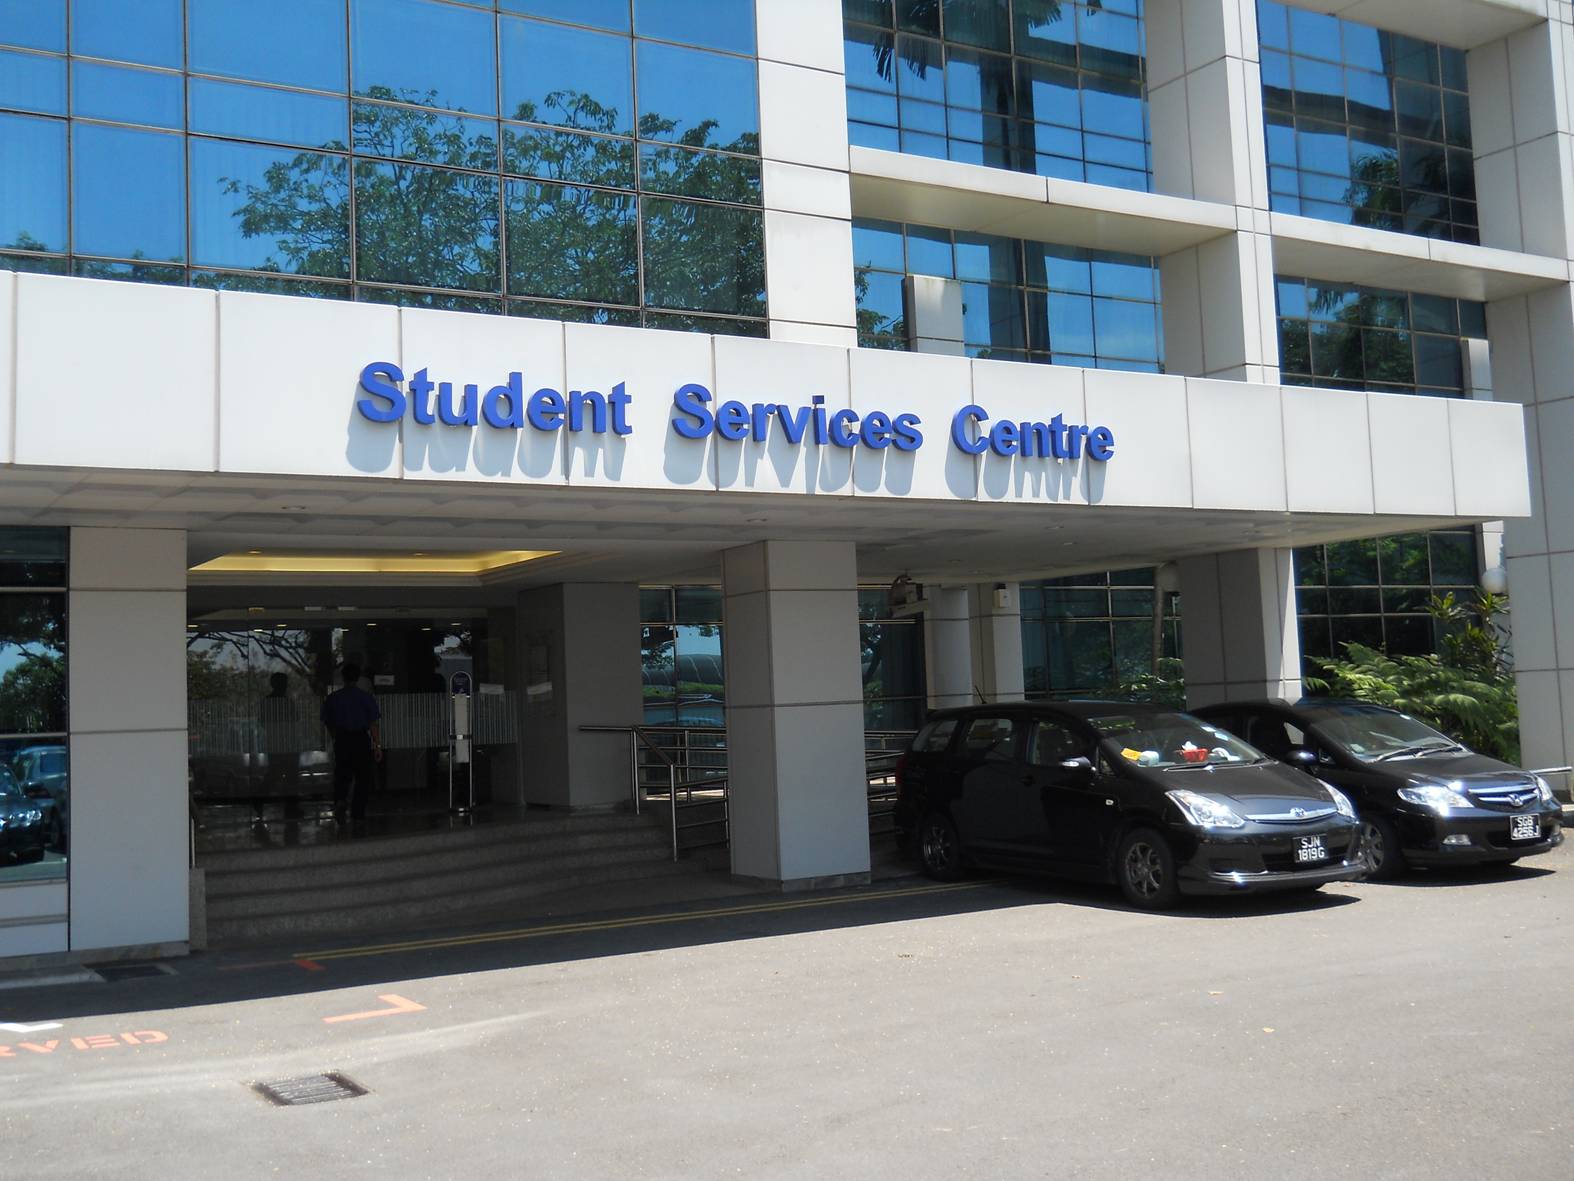 picture: Student services center, Nanyang Technological University, Singapore